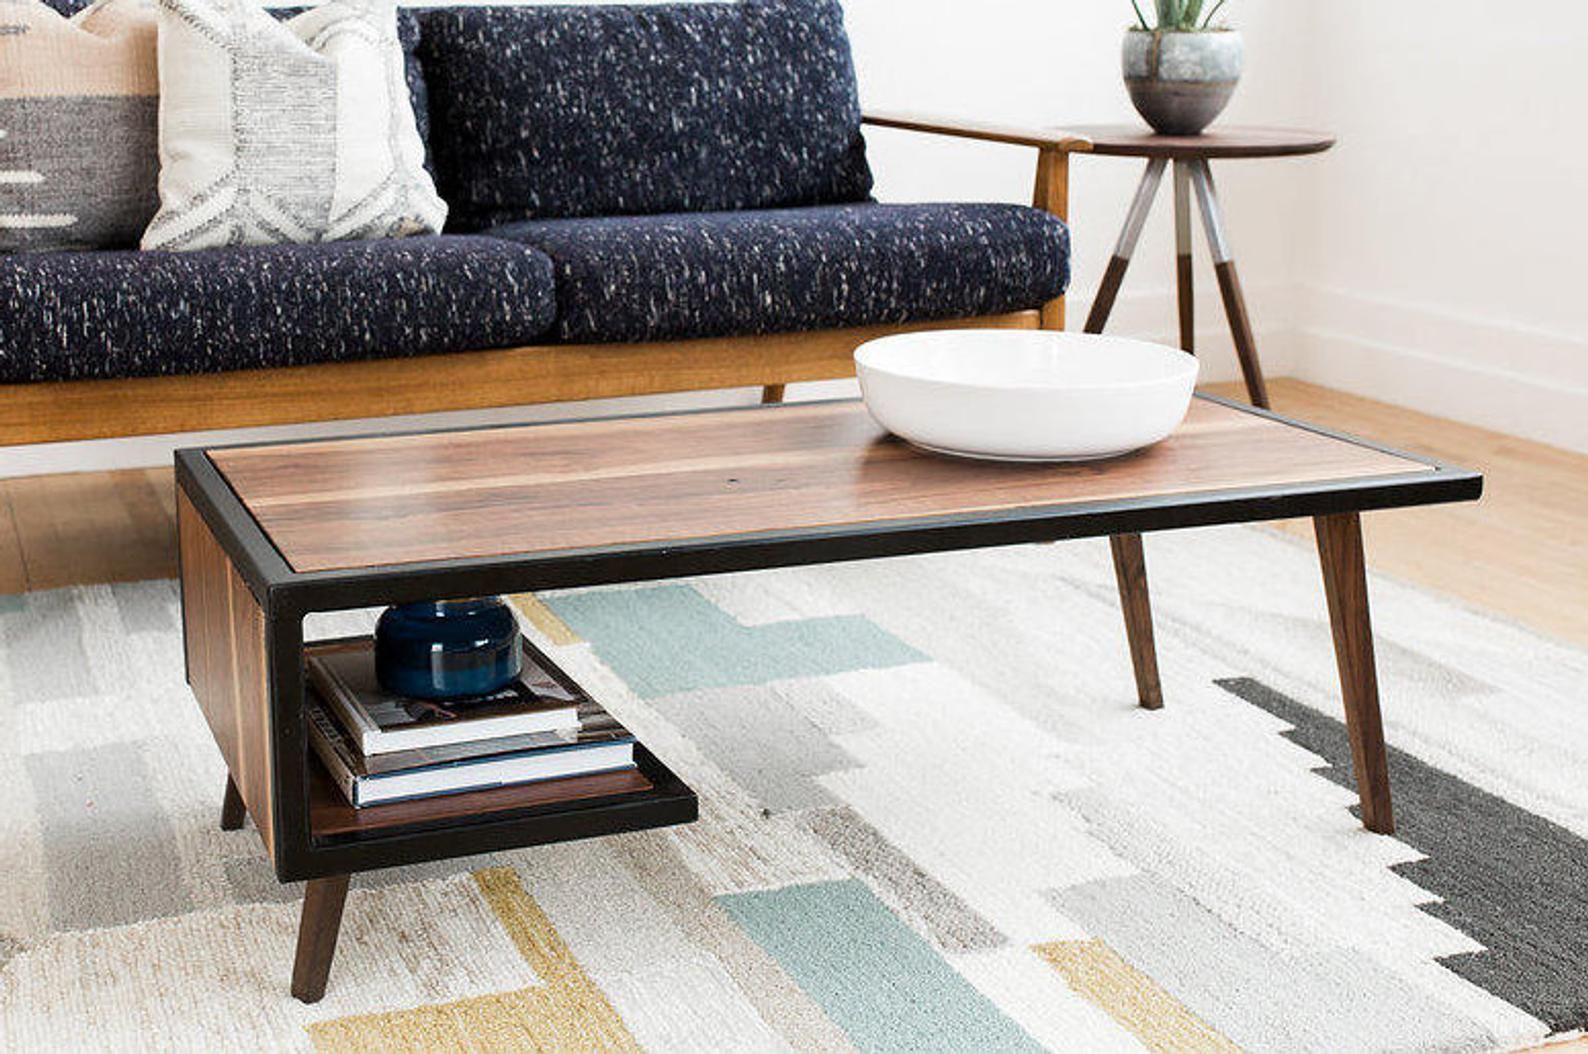 Mid Century Modern Style Coffee Tables You'll Love – Atomic Ranch In Wooden Mid Century Coffee Tables (Photo 3 of 15)